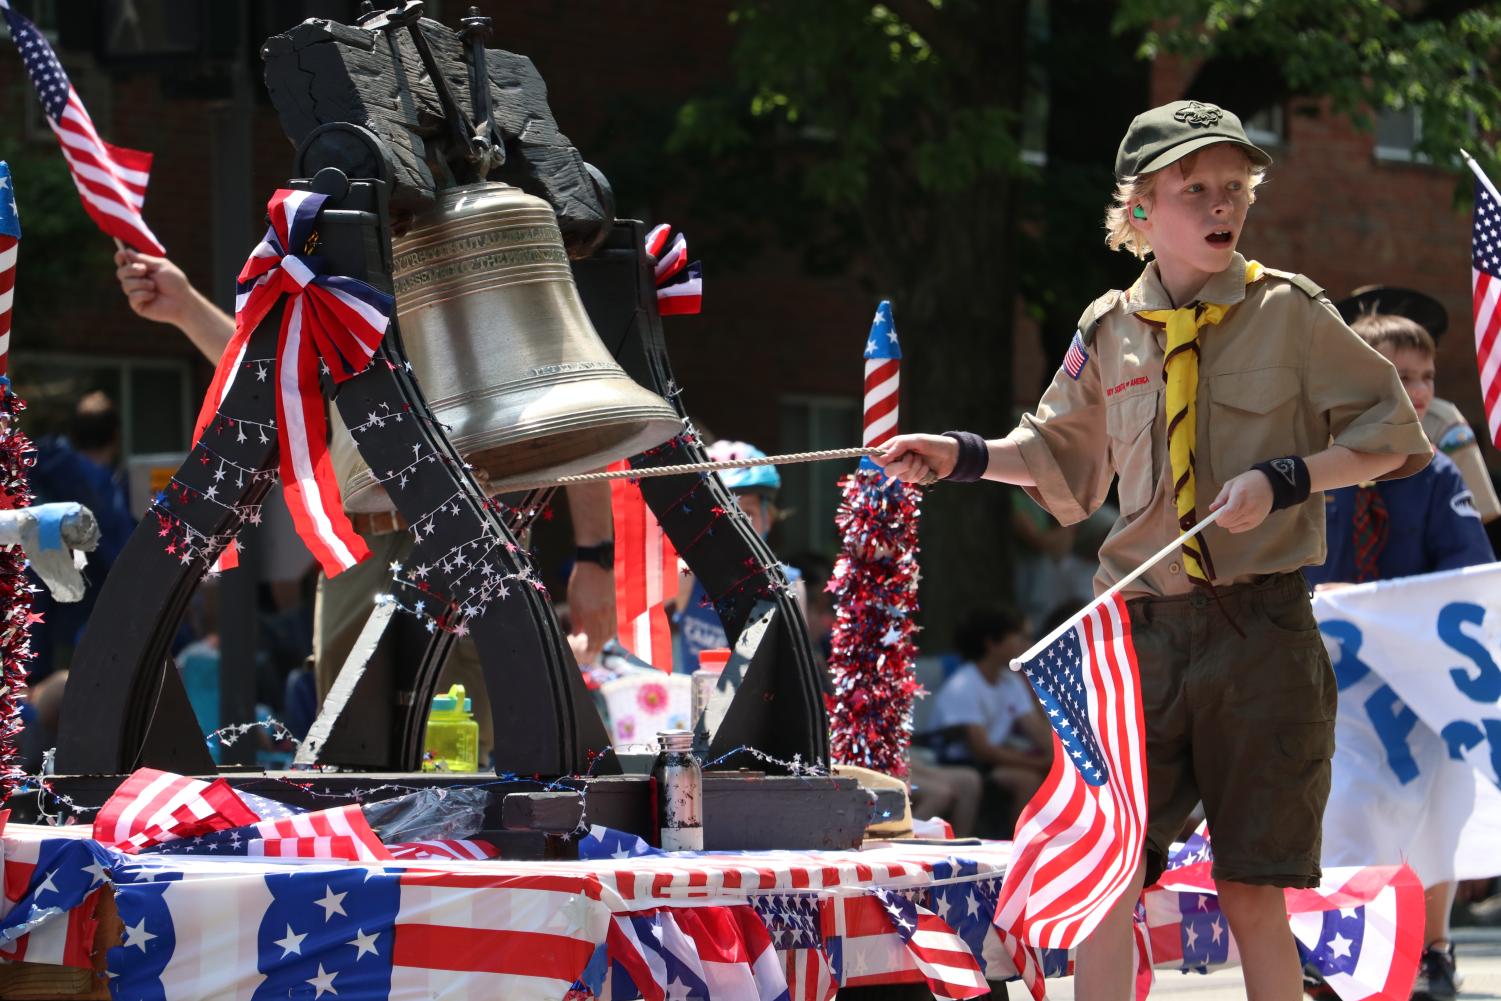 A boy scout rings a bell on a float decorated with American flags.